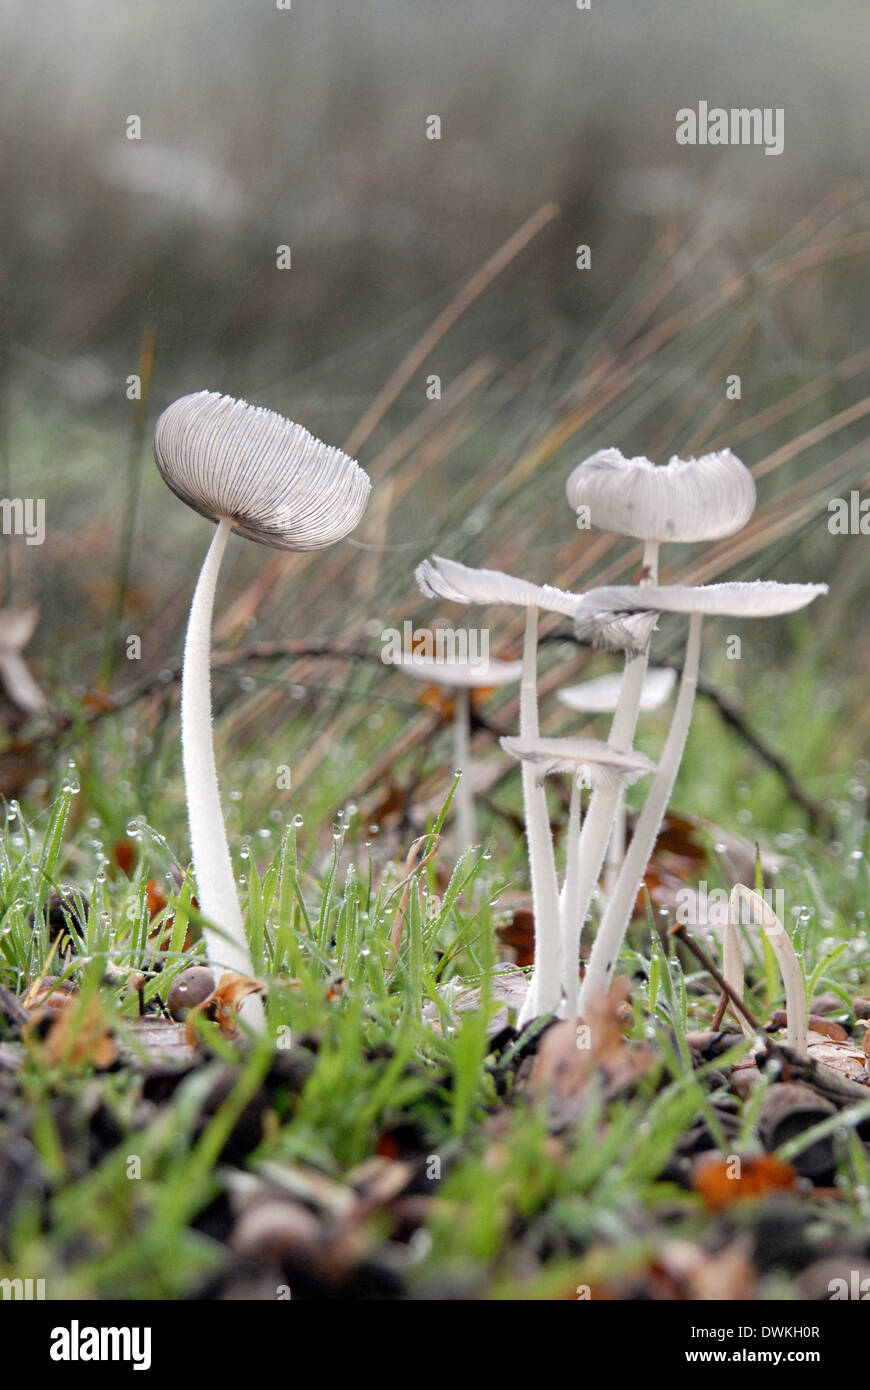 Toadstools growing in a field. Stock Photo